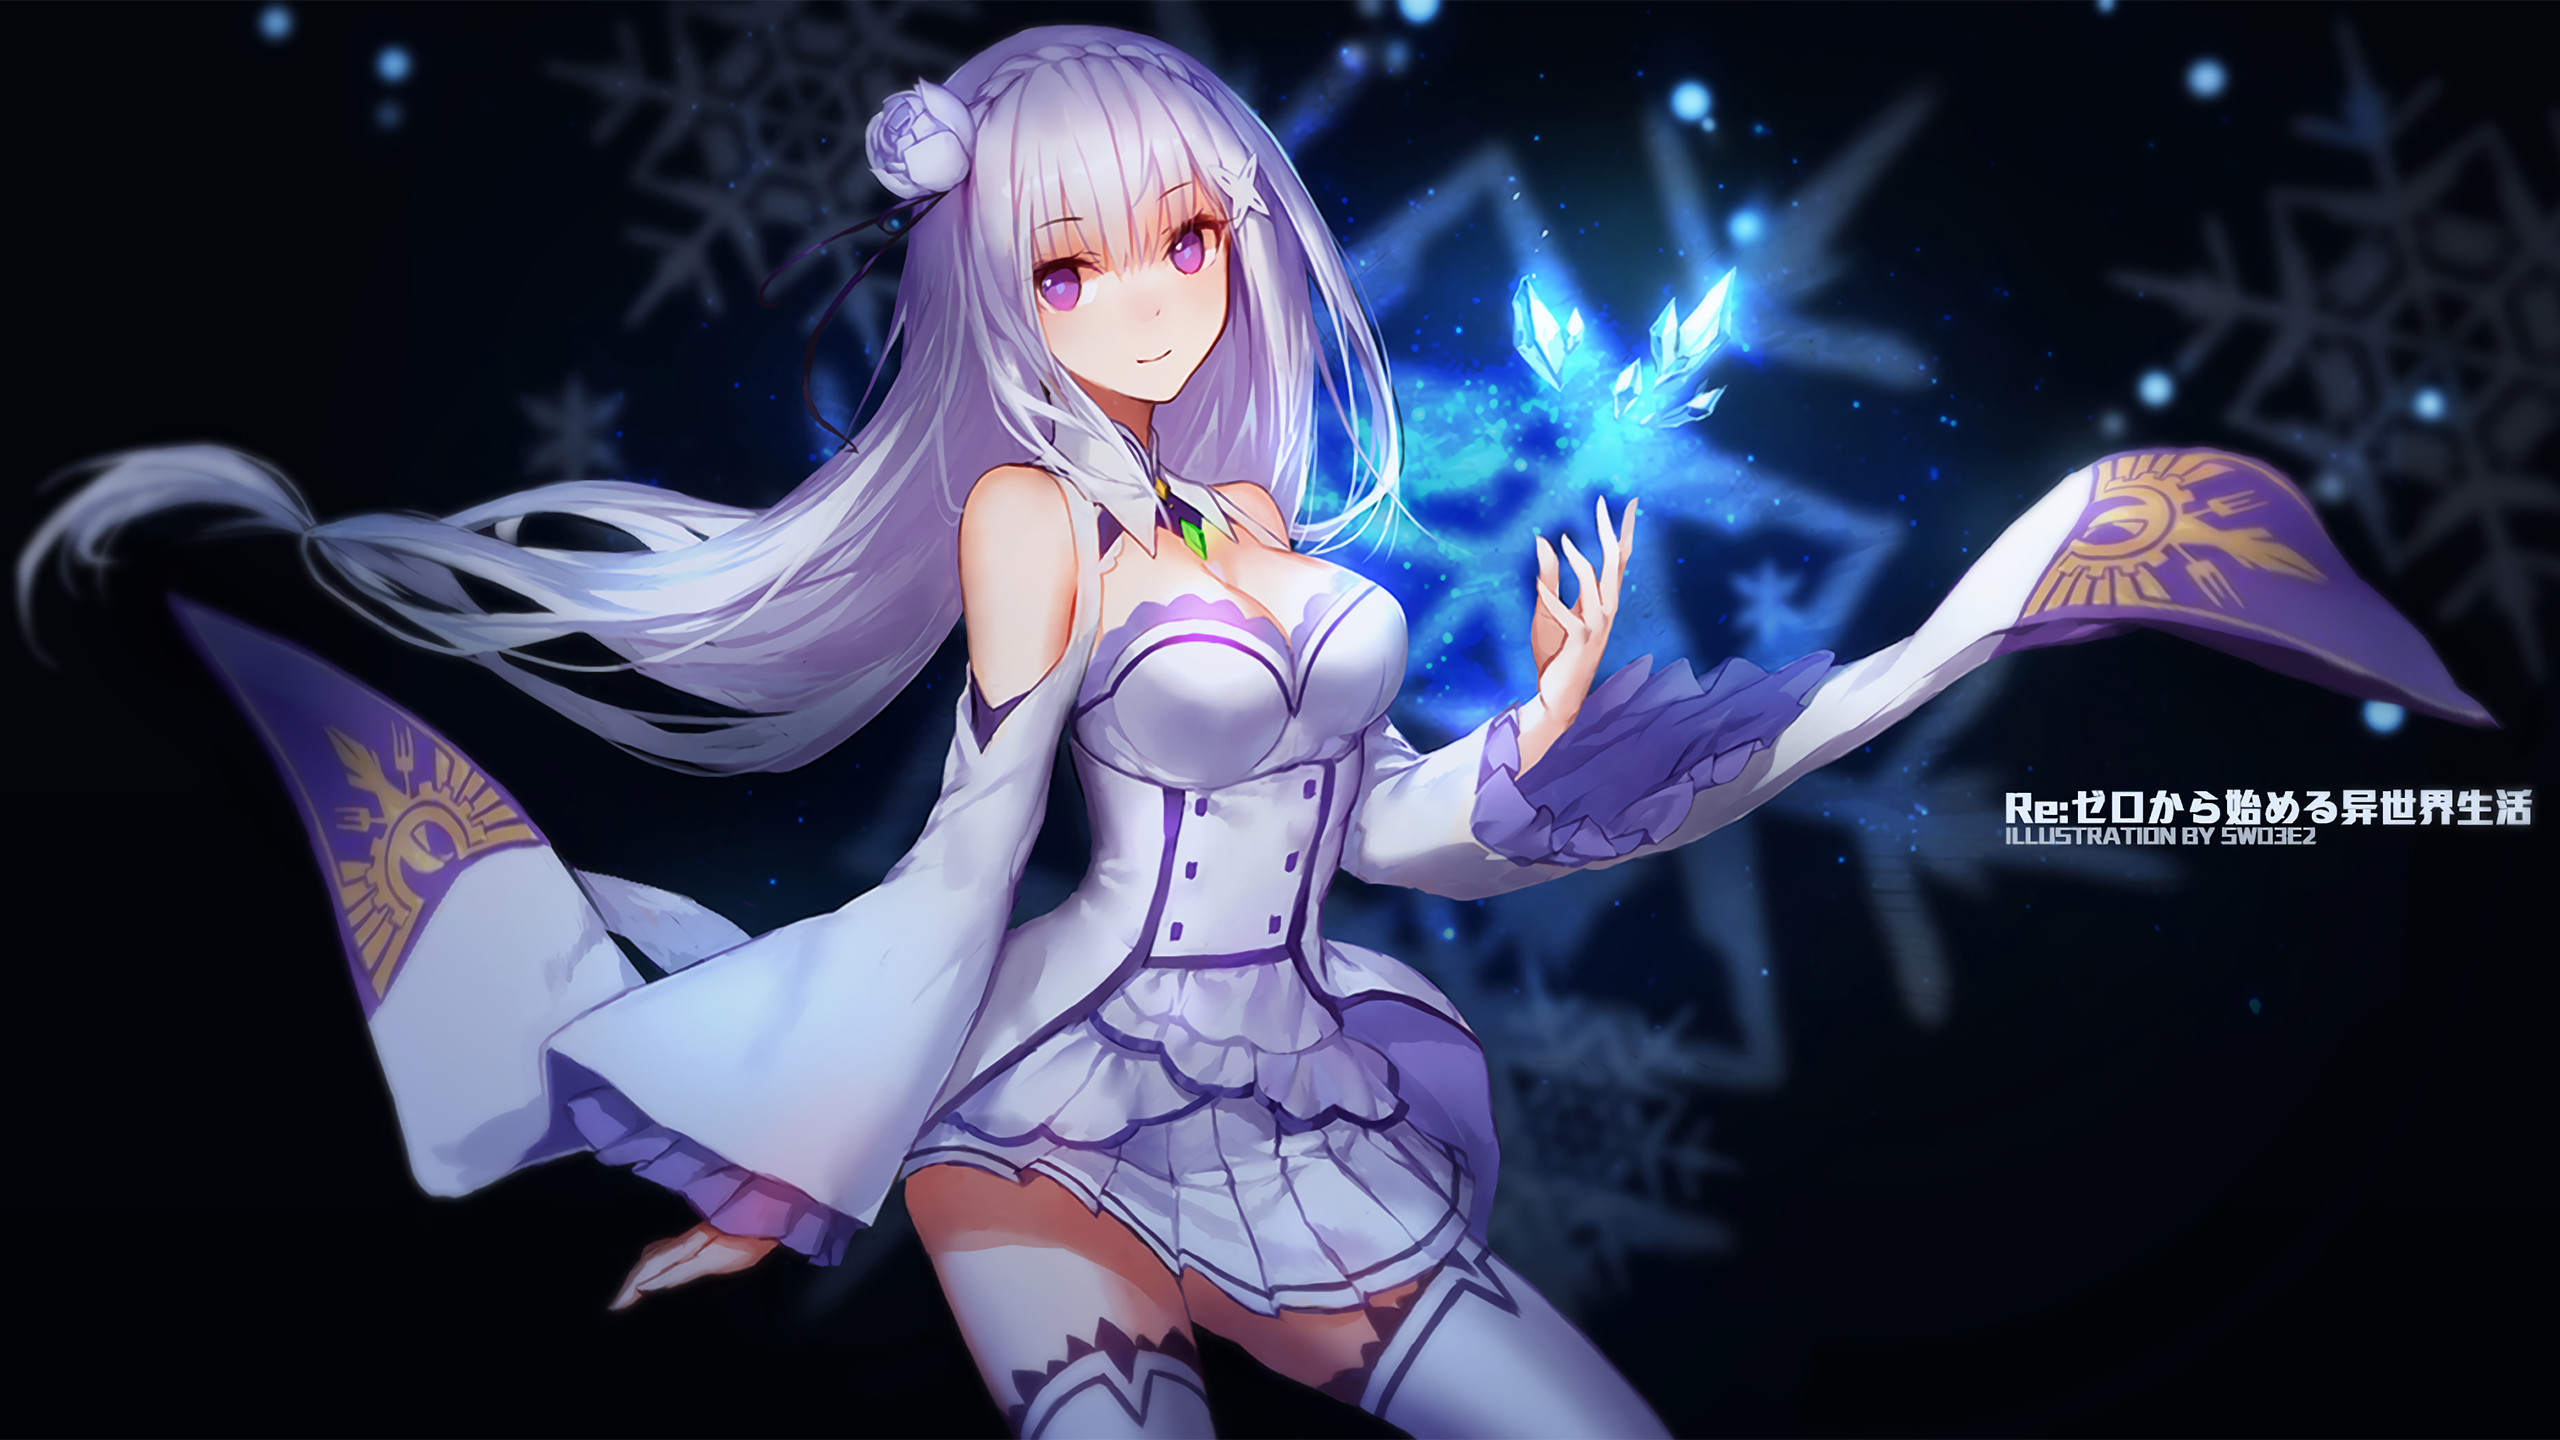 2560x1440 852 Re:ZERO -Starting Life in Another World- HD Wallpapers | HintergrÃ¼nde -  Wallpaper Abyss